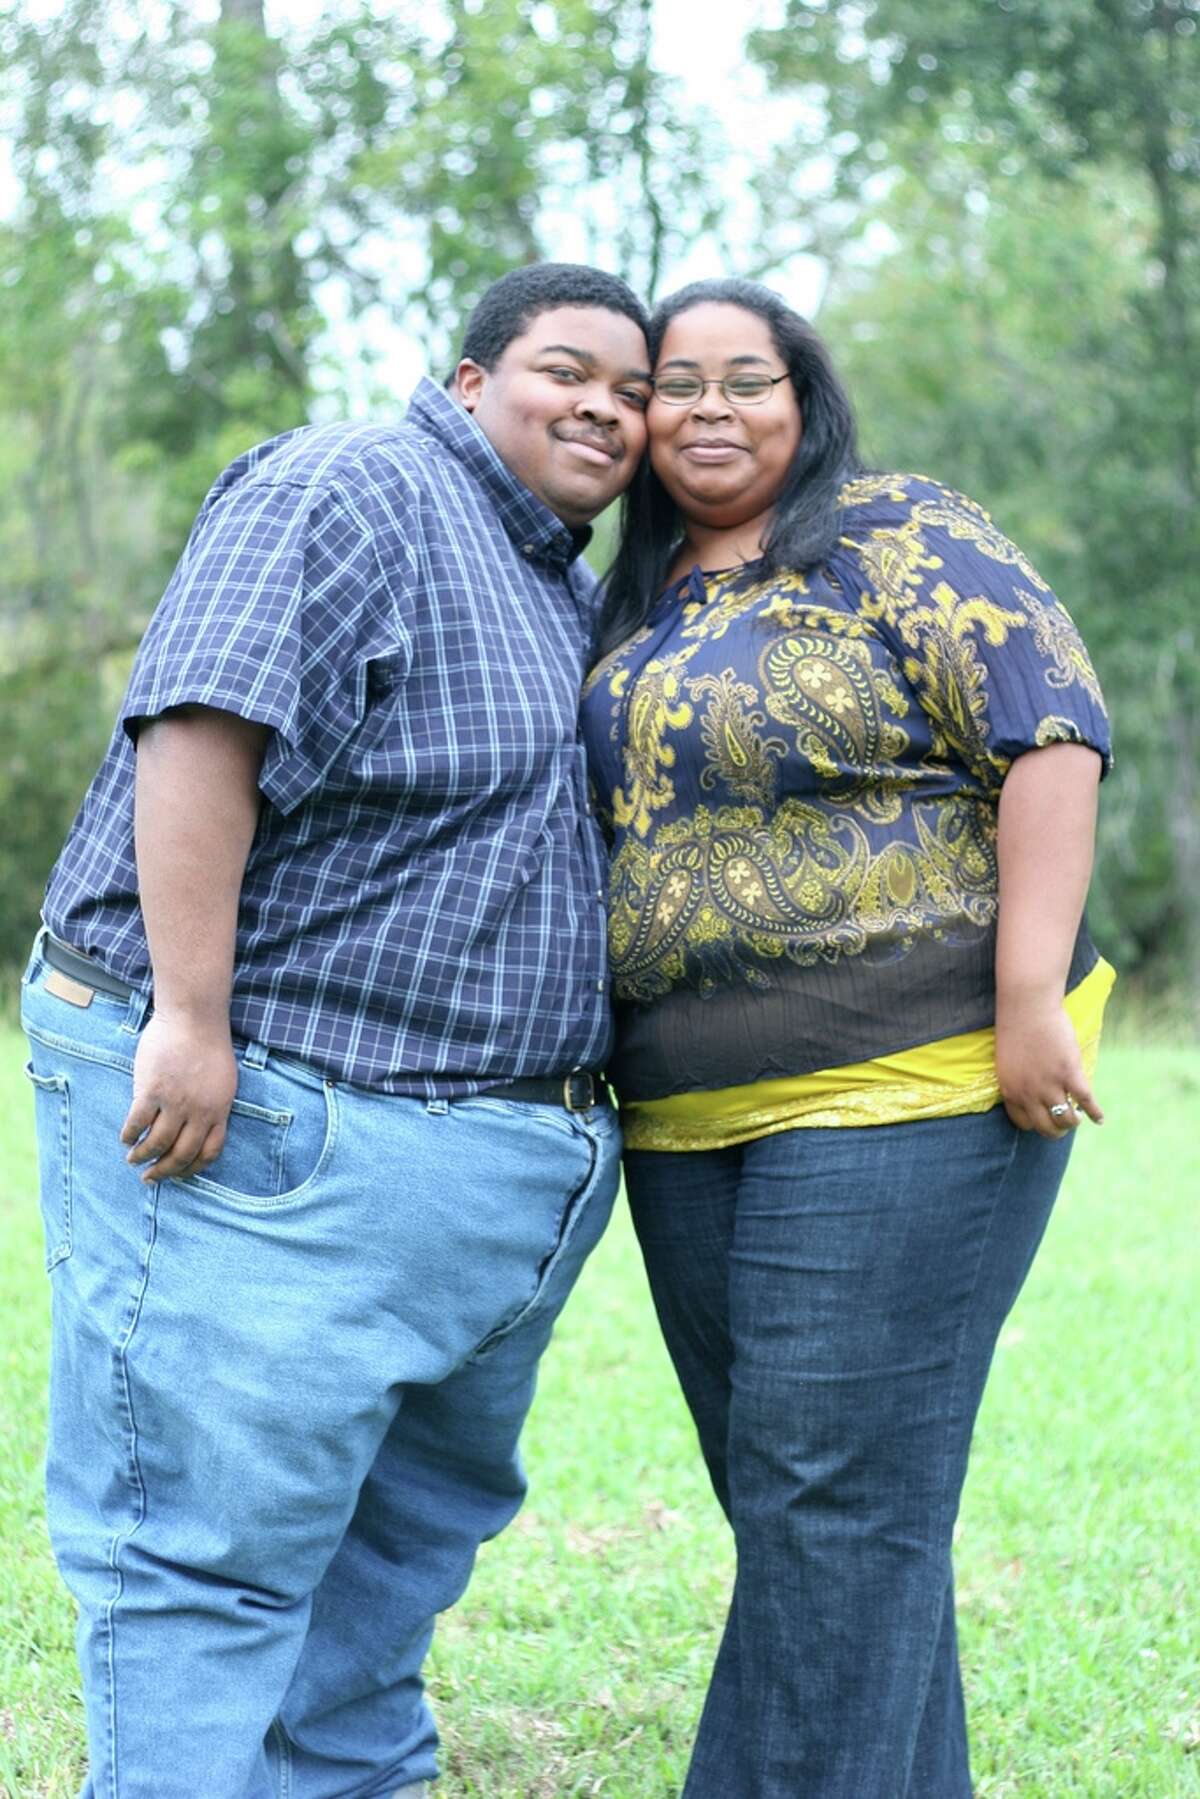 Willie and Angela Gillis, of Beaumont, have lost a combined 500 pounds since January 2011. Willie has gone from 492 pounds to 192 while Angela went from 338 to 138. Here they are in October2009.